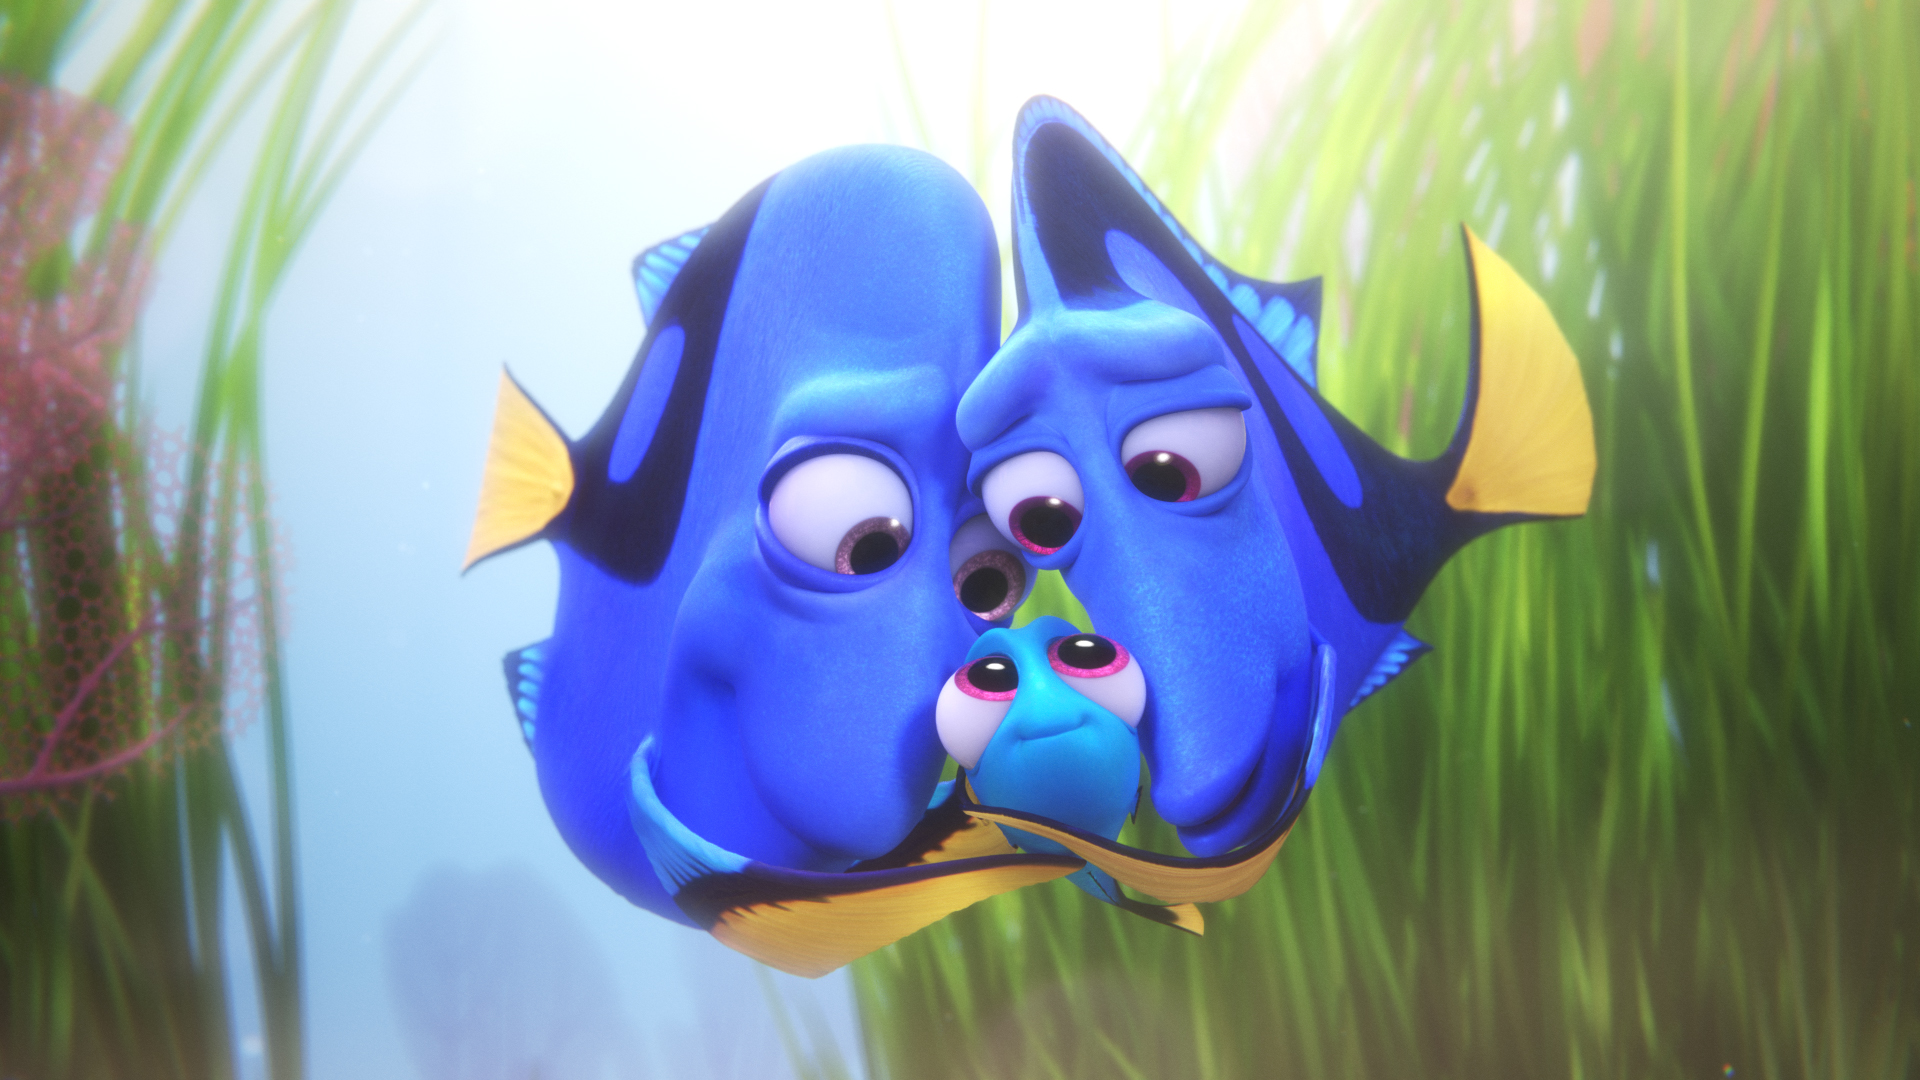 FINDING DORY – Pictured (L-R): Charlie, Dory, Jenny. ©2016 Disney•Pixar. All Rights Reserved.